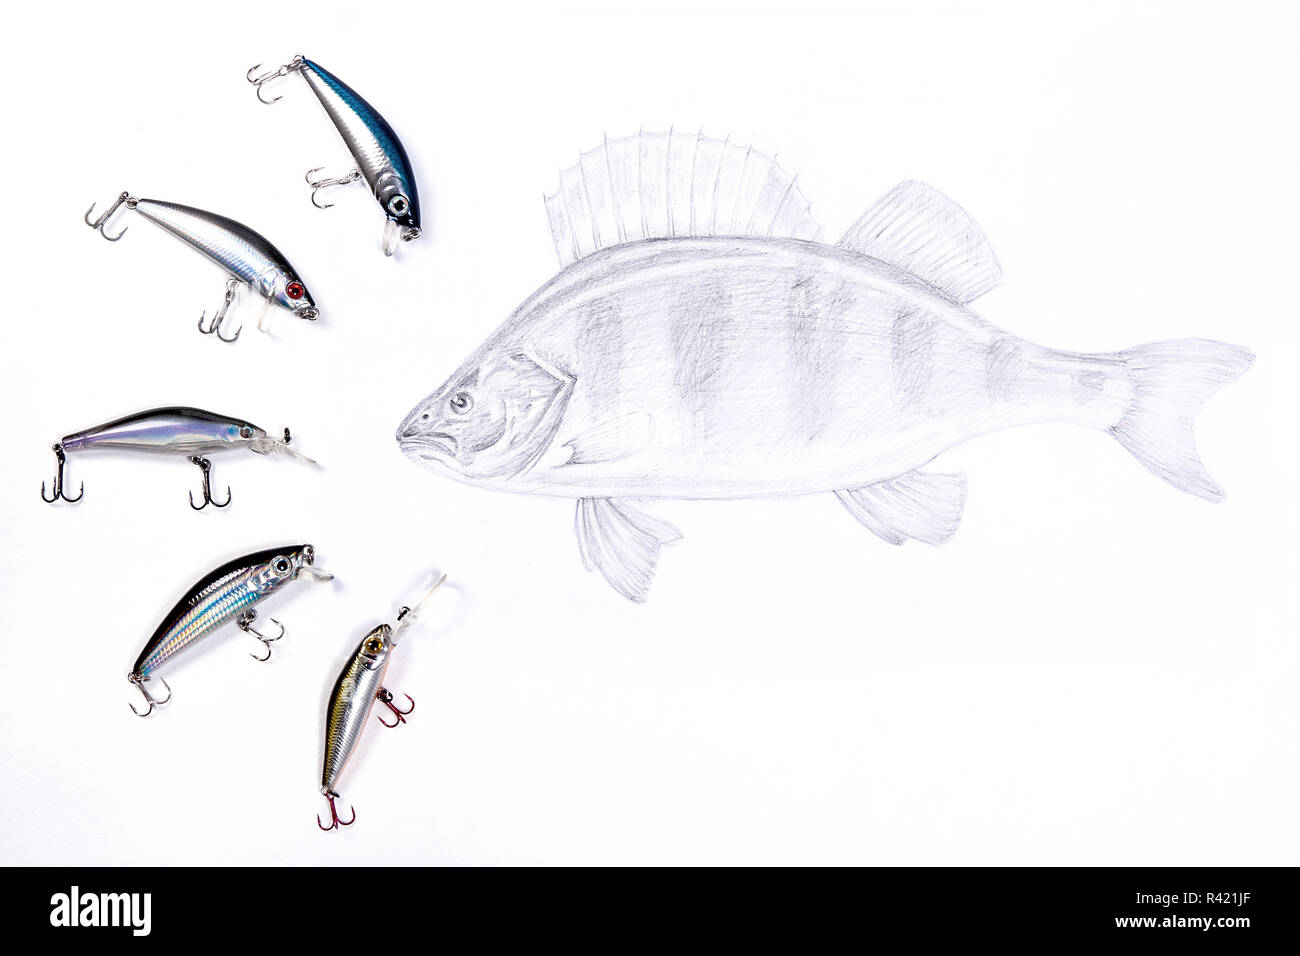 Fishing plastic baits with drawing fish on the white background. Stock Photo